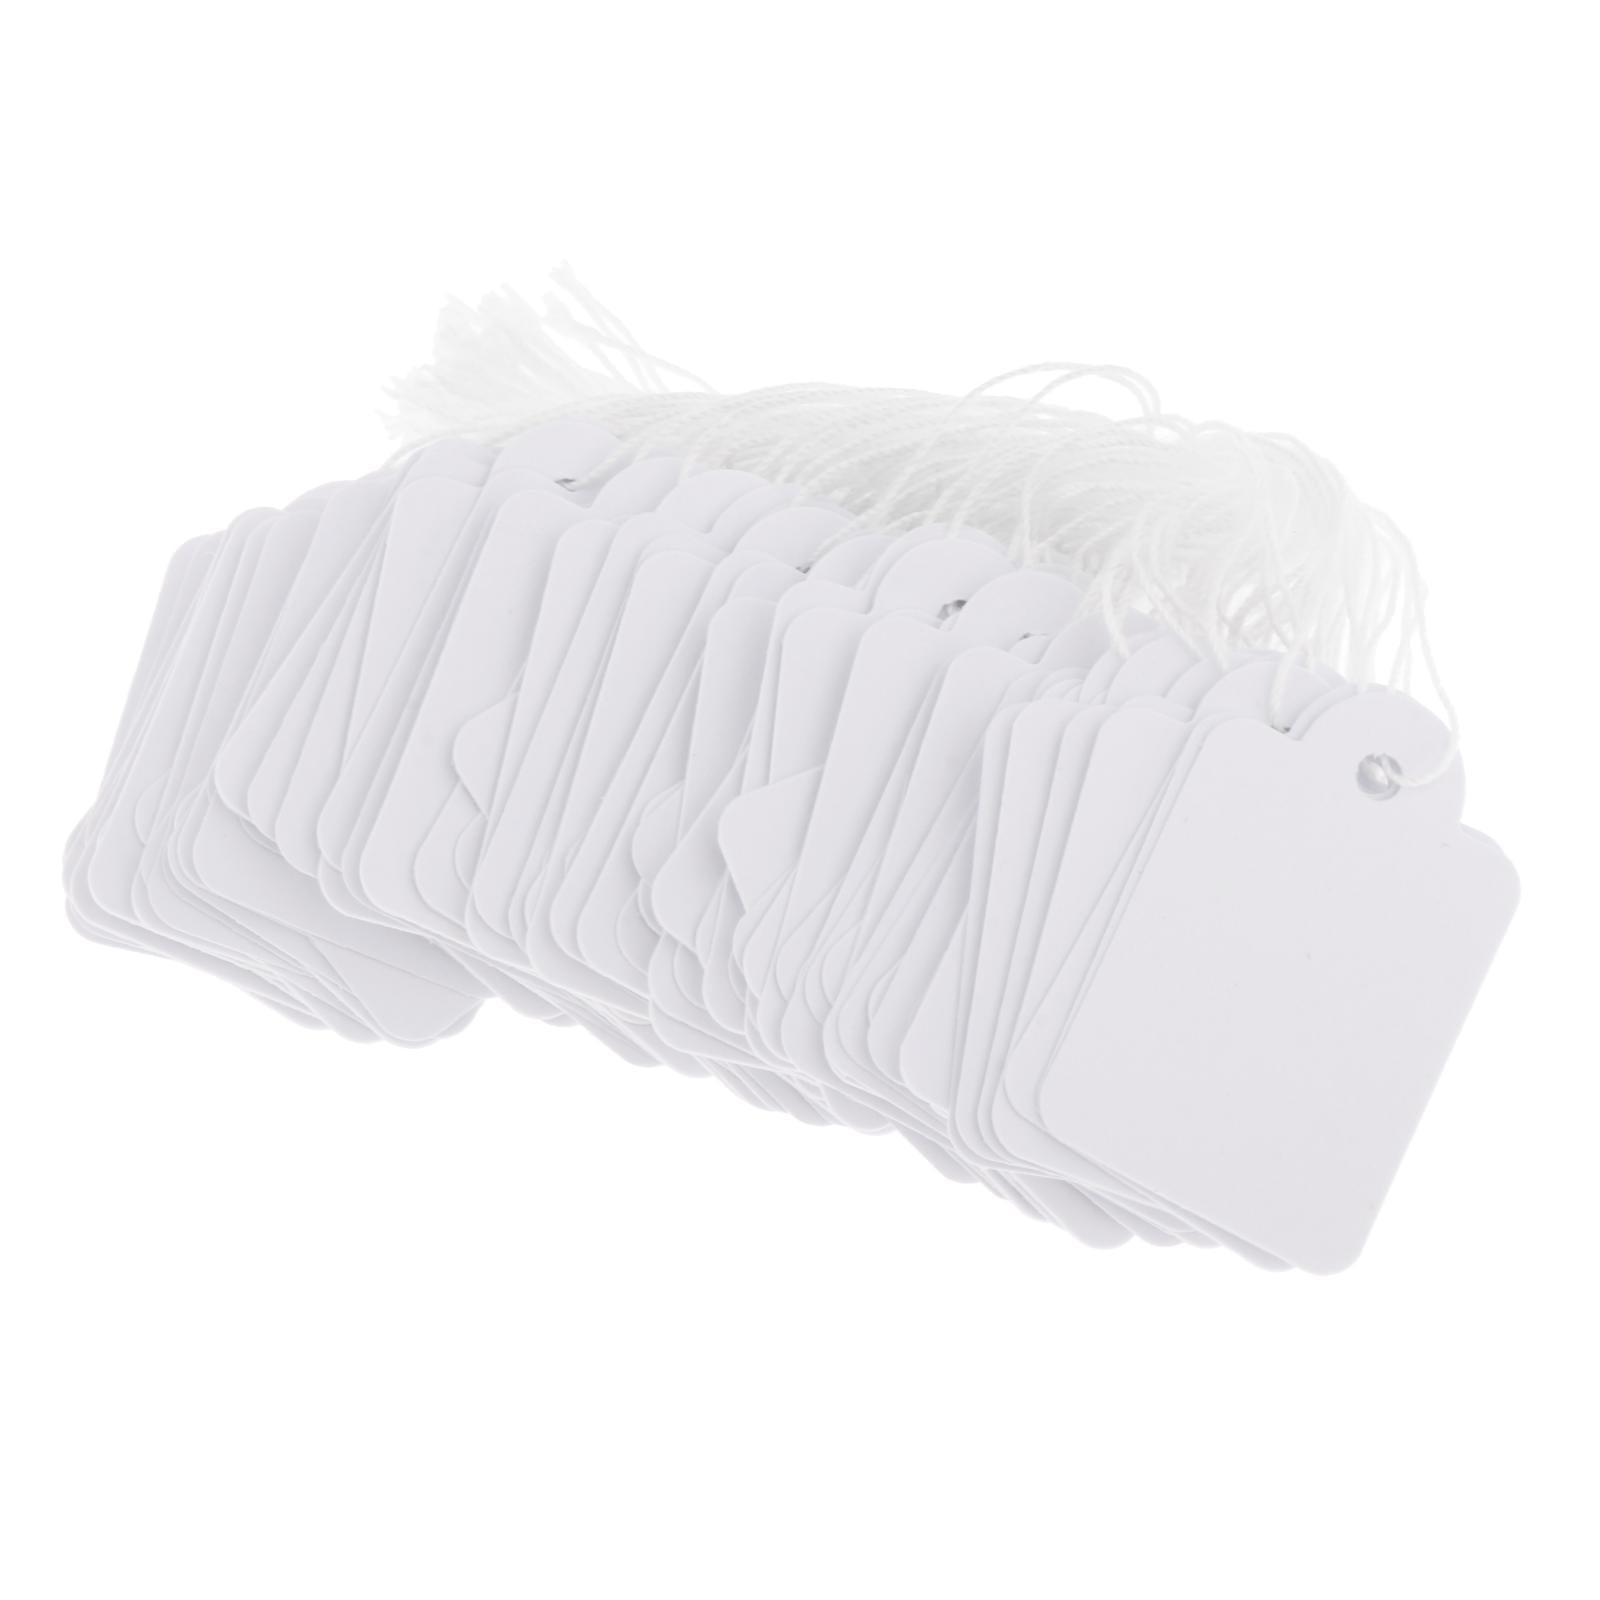 jijAcraft 500Pcs Price Tags with String Attached, White Clothing Tags for  Business Selling, Small Blank Labeling Tags, Retail Strung Marking Tags